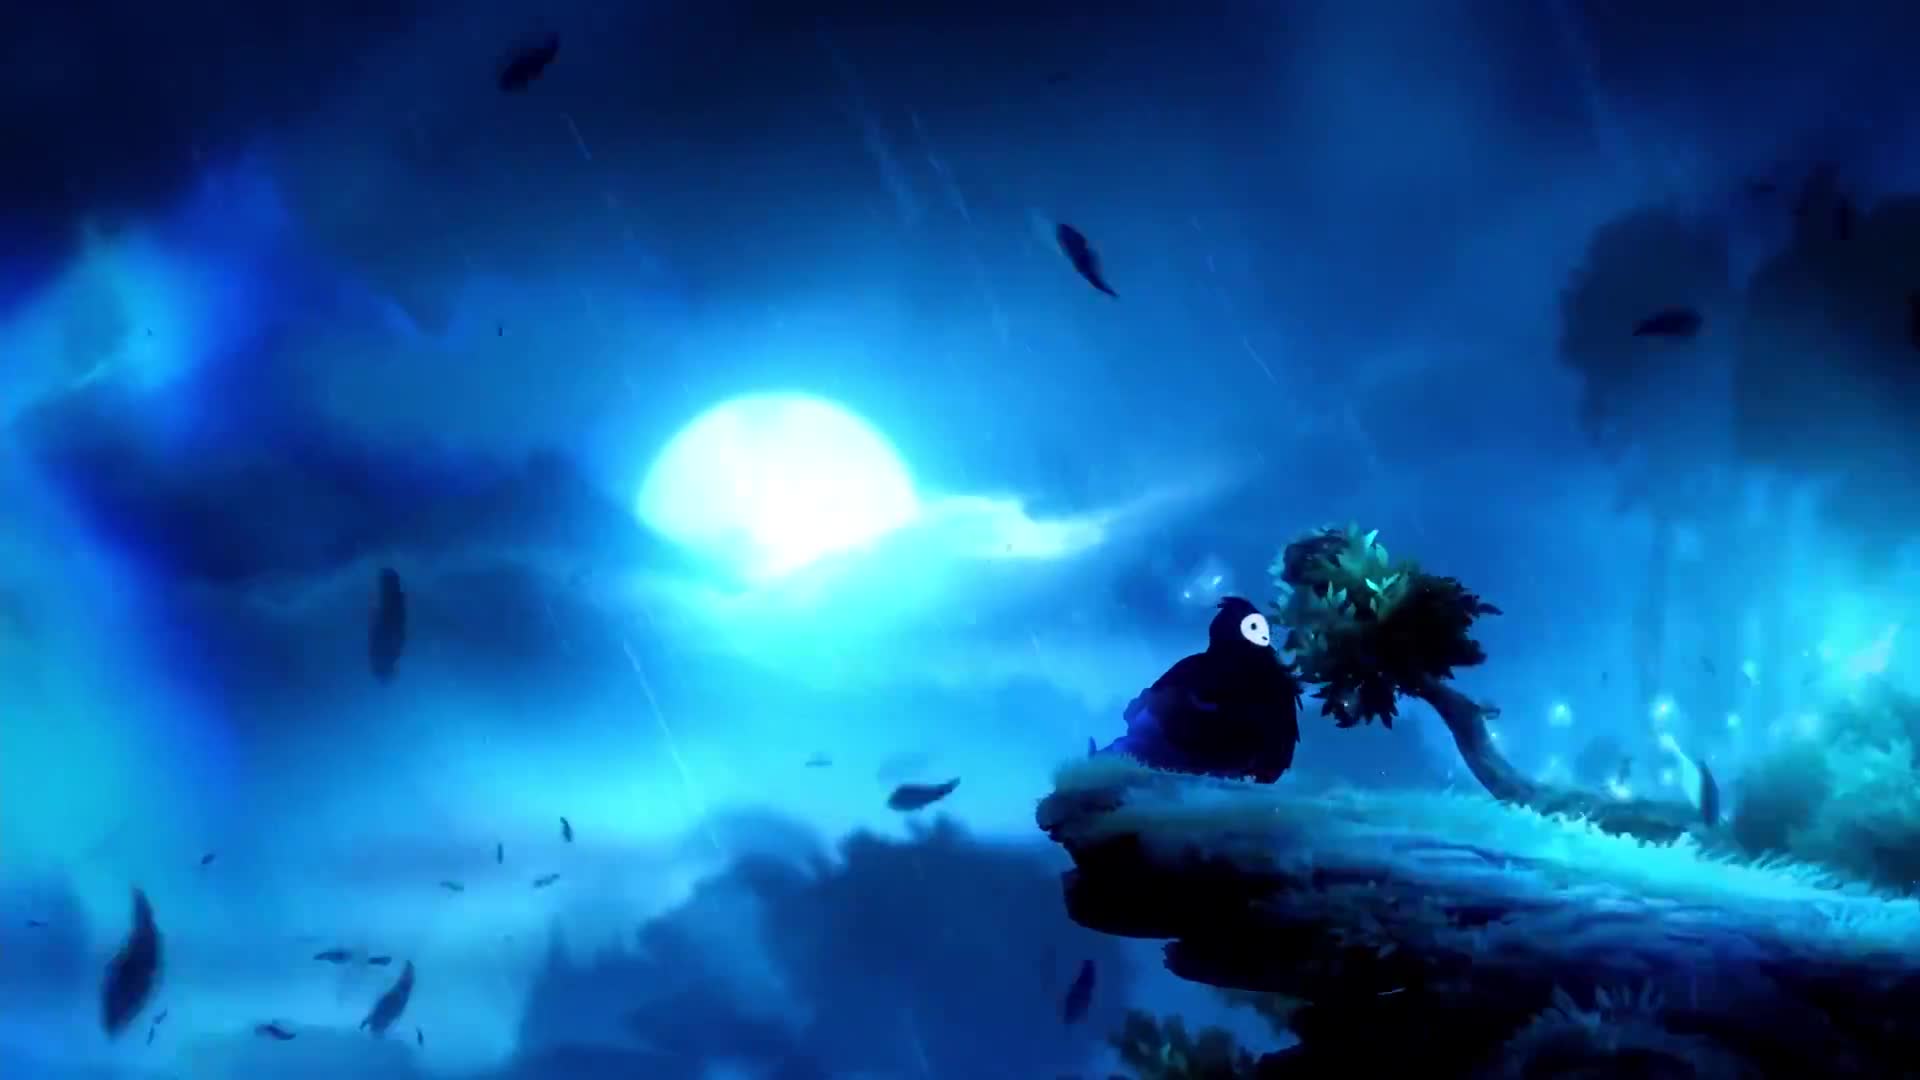 Ori and the Blind Forest - TGS trailer